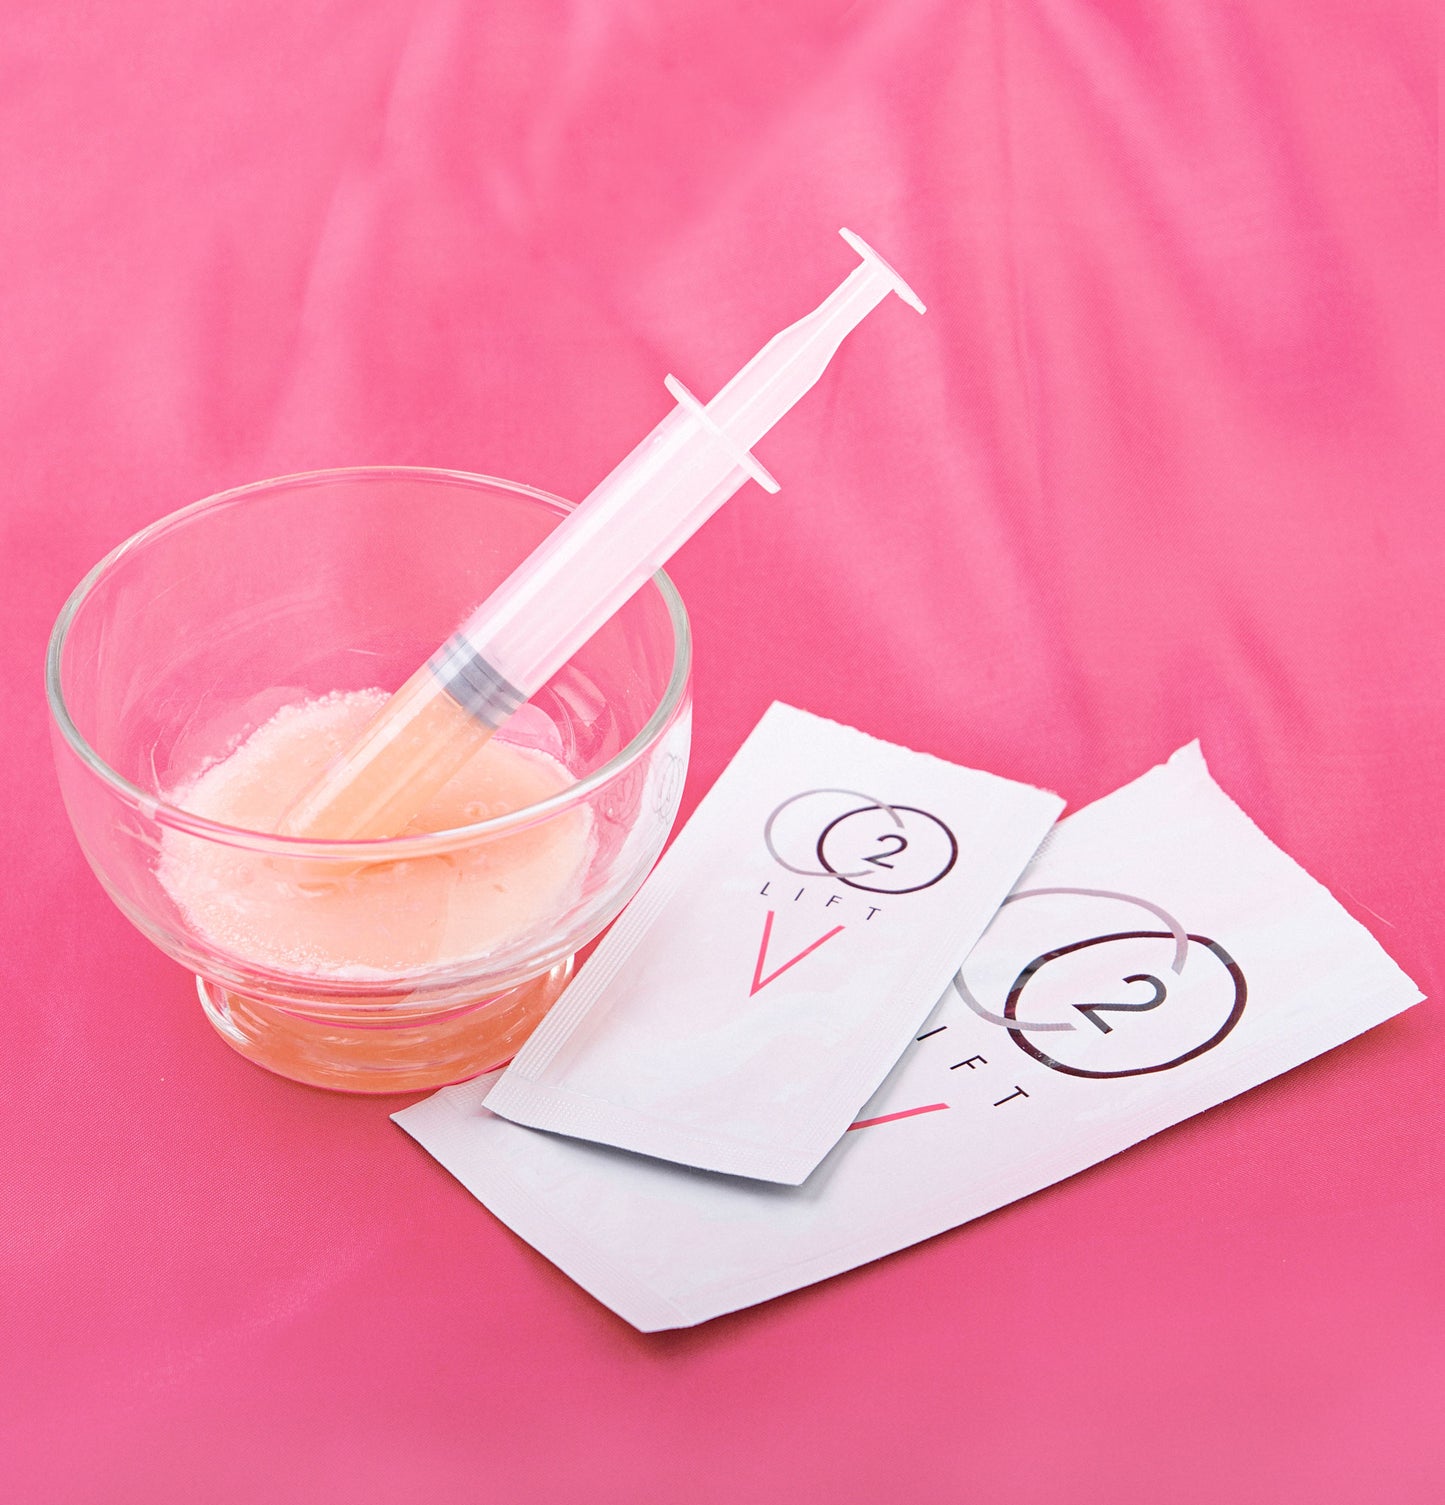 The At-Home Carboxy Vaginal Treatment